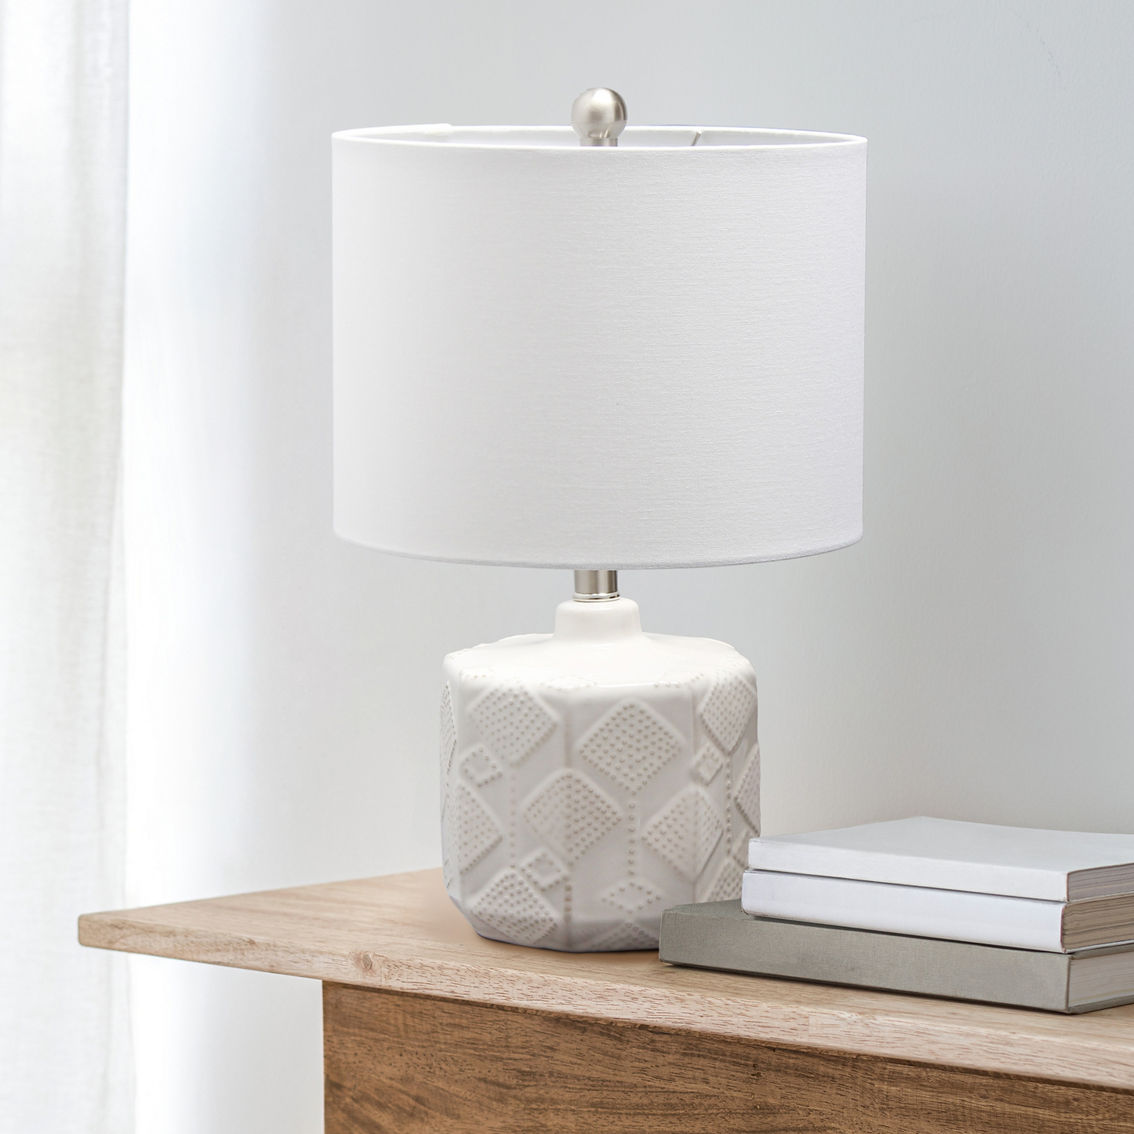 Lalia Home 19 in. Floral Textured Bedside Table Lamp with White Fabric Shade - Image 3 of 8